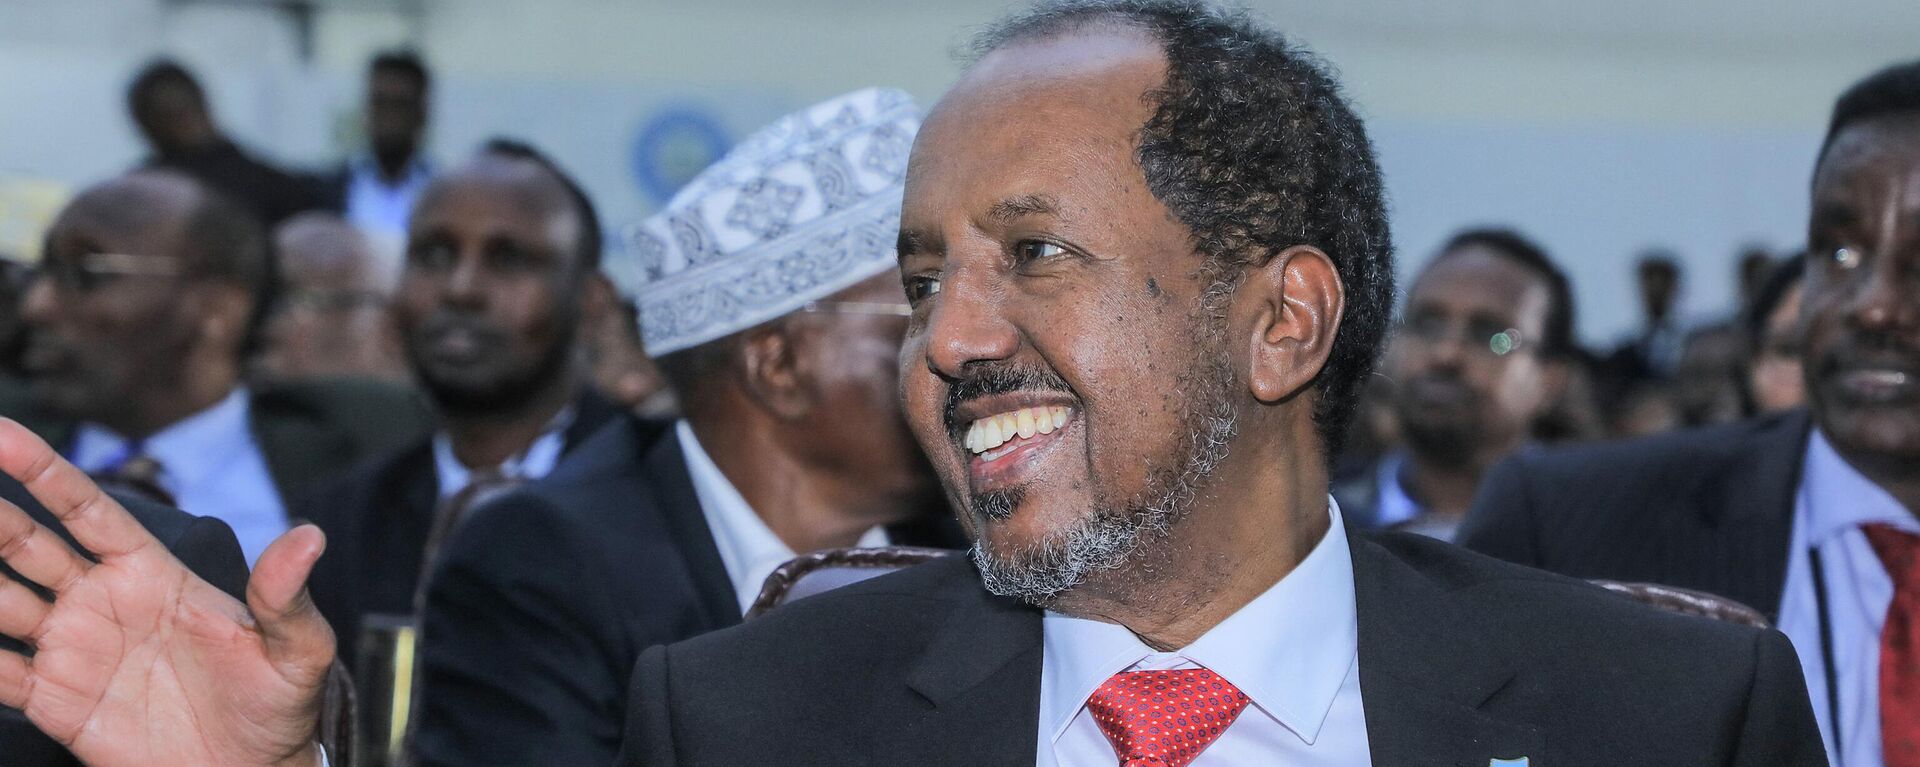 Newly elected Somalia President Hassan Sheikh Mohamud waves after he was sworn-in, in the capital Mogadishu, on May 15, 2022. - Somalia handed Hassan Sheikh Mohamud the presidency for a second time following May 15's long-overdue election in the troubled Horn of Africa nation, which is confronting an Islamist insurgency and the threat of famine. - Sputnik International, 1920, 16.05.2022